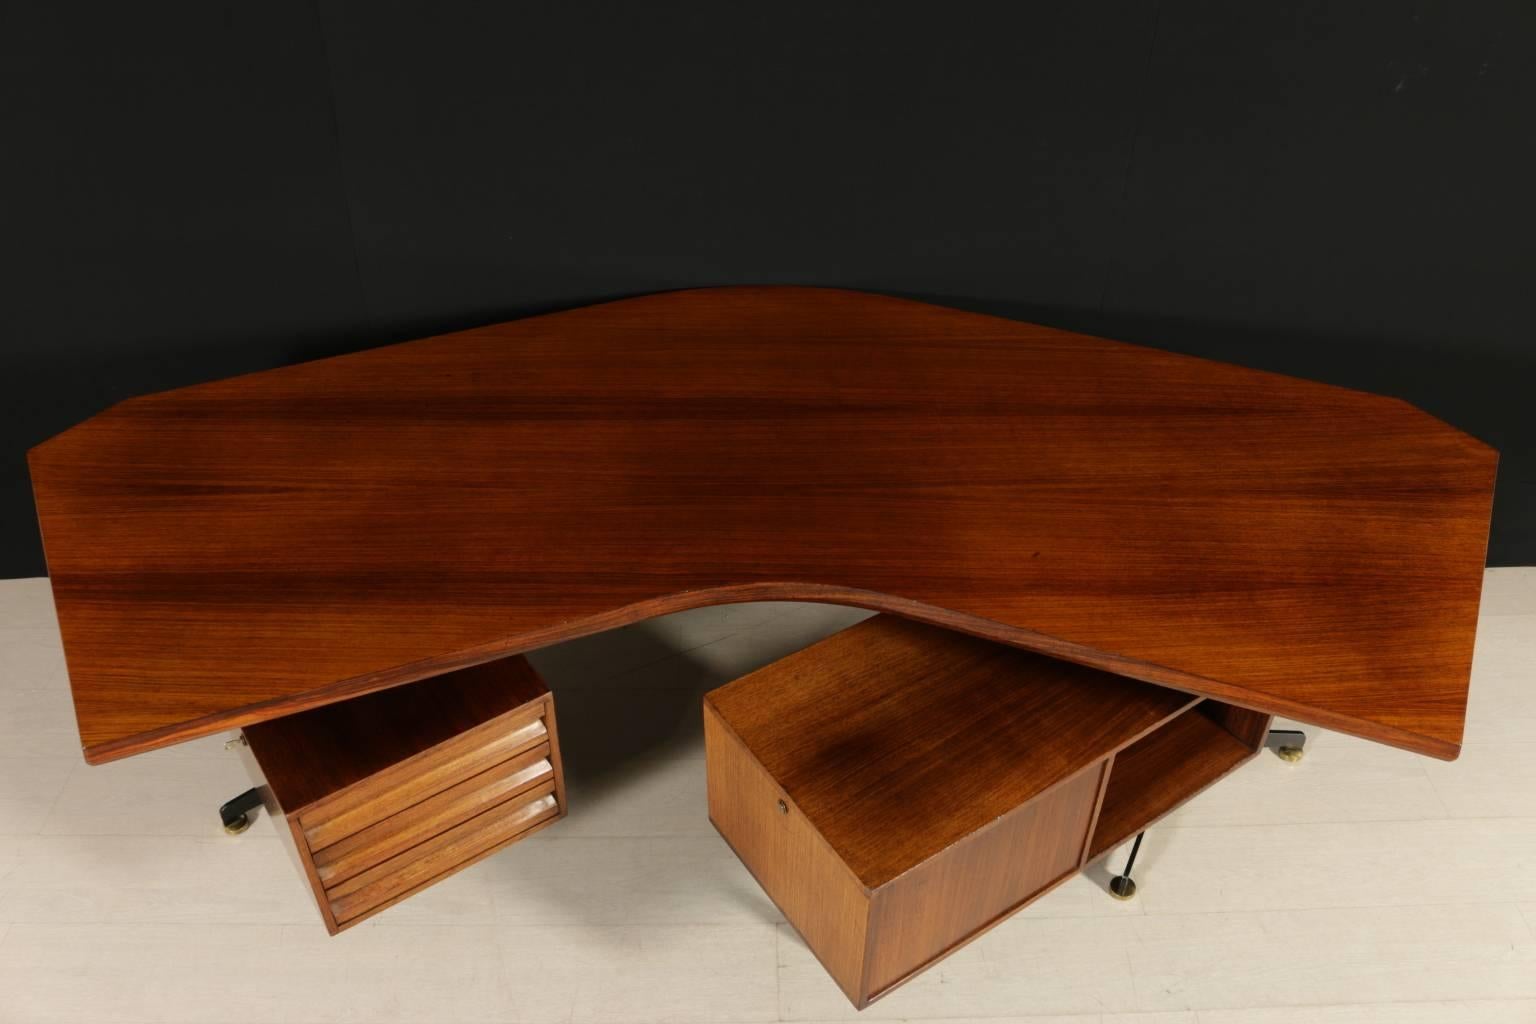 A desk with swiveling chest of drawers designed by Osvaldo Borsani, model T96. Rosewood veneer, lacquered metal structure with adjustable brass feet. Manufactured in Italy, 1950s-1960s. The desk was designed in 1956 for ENI furnishing in San Donato